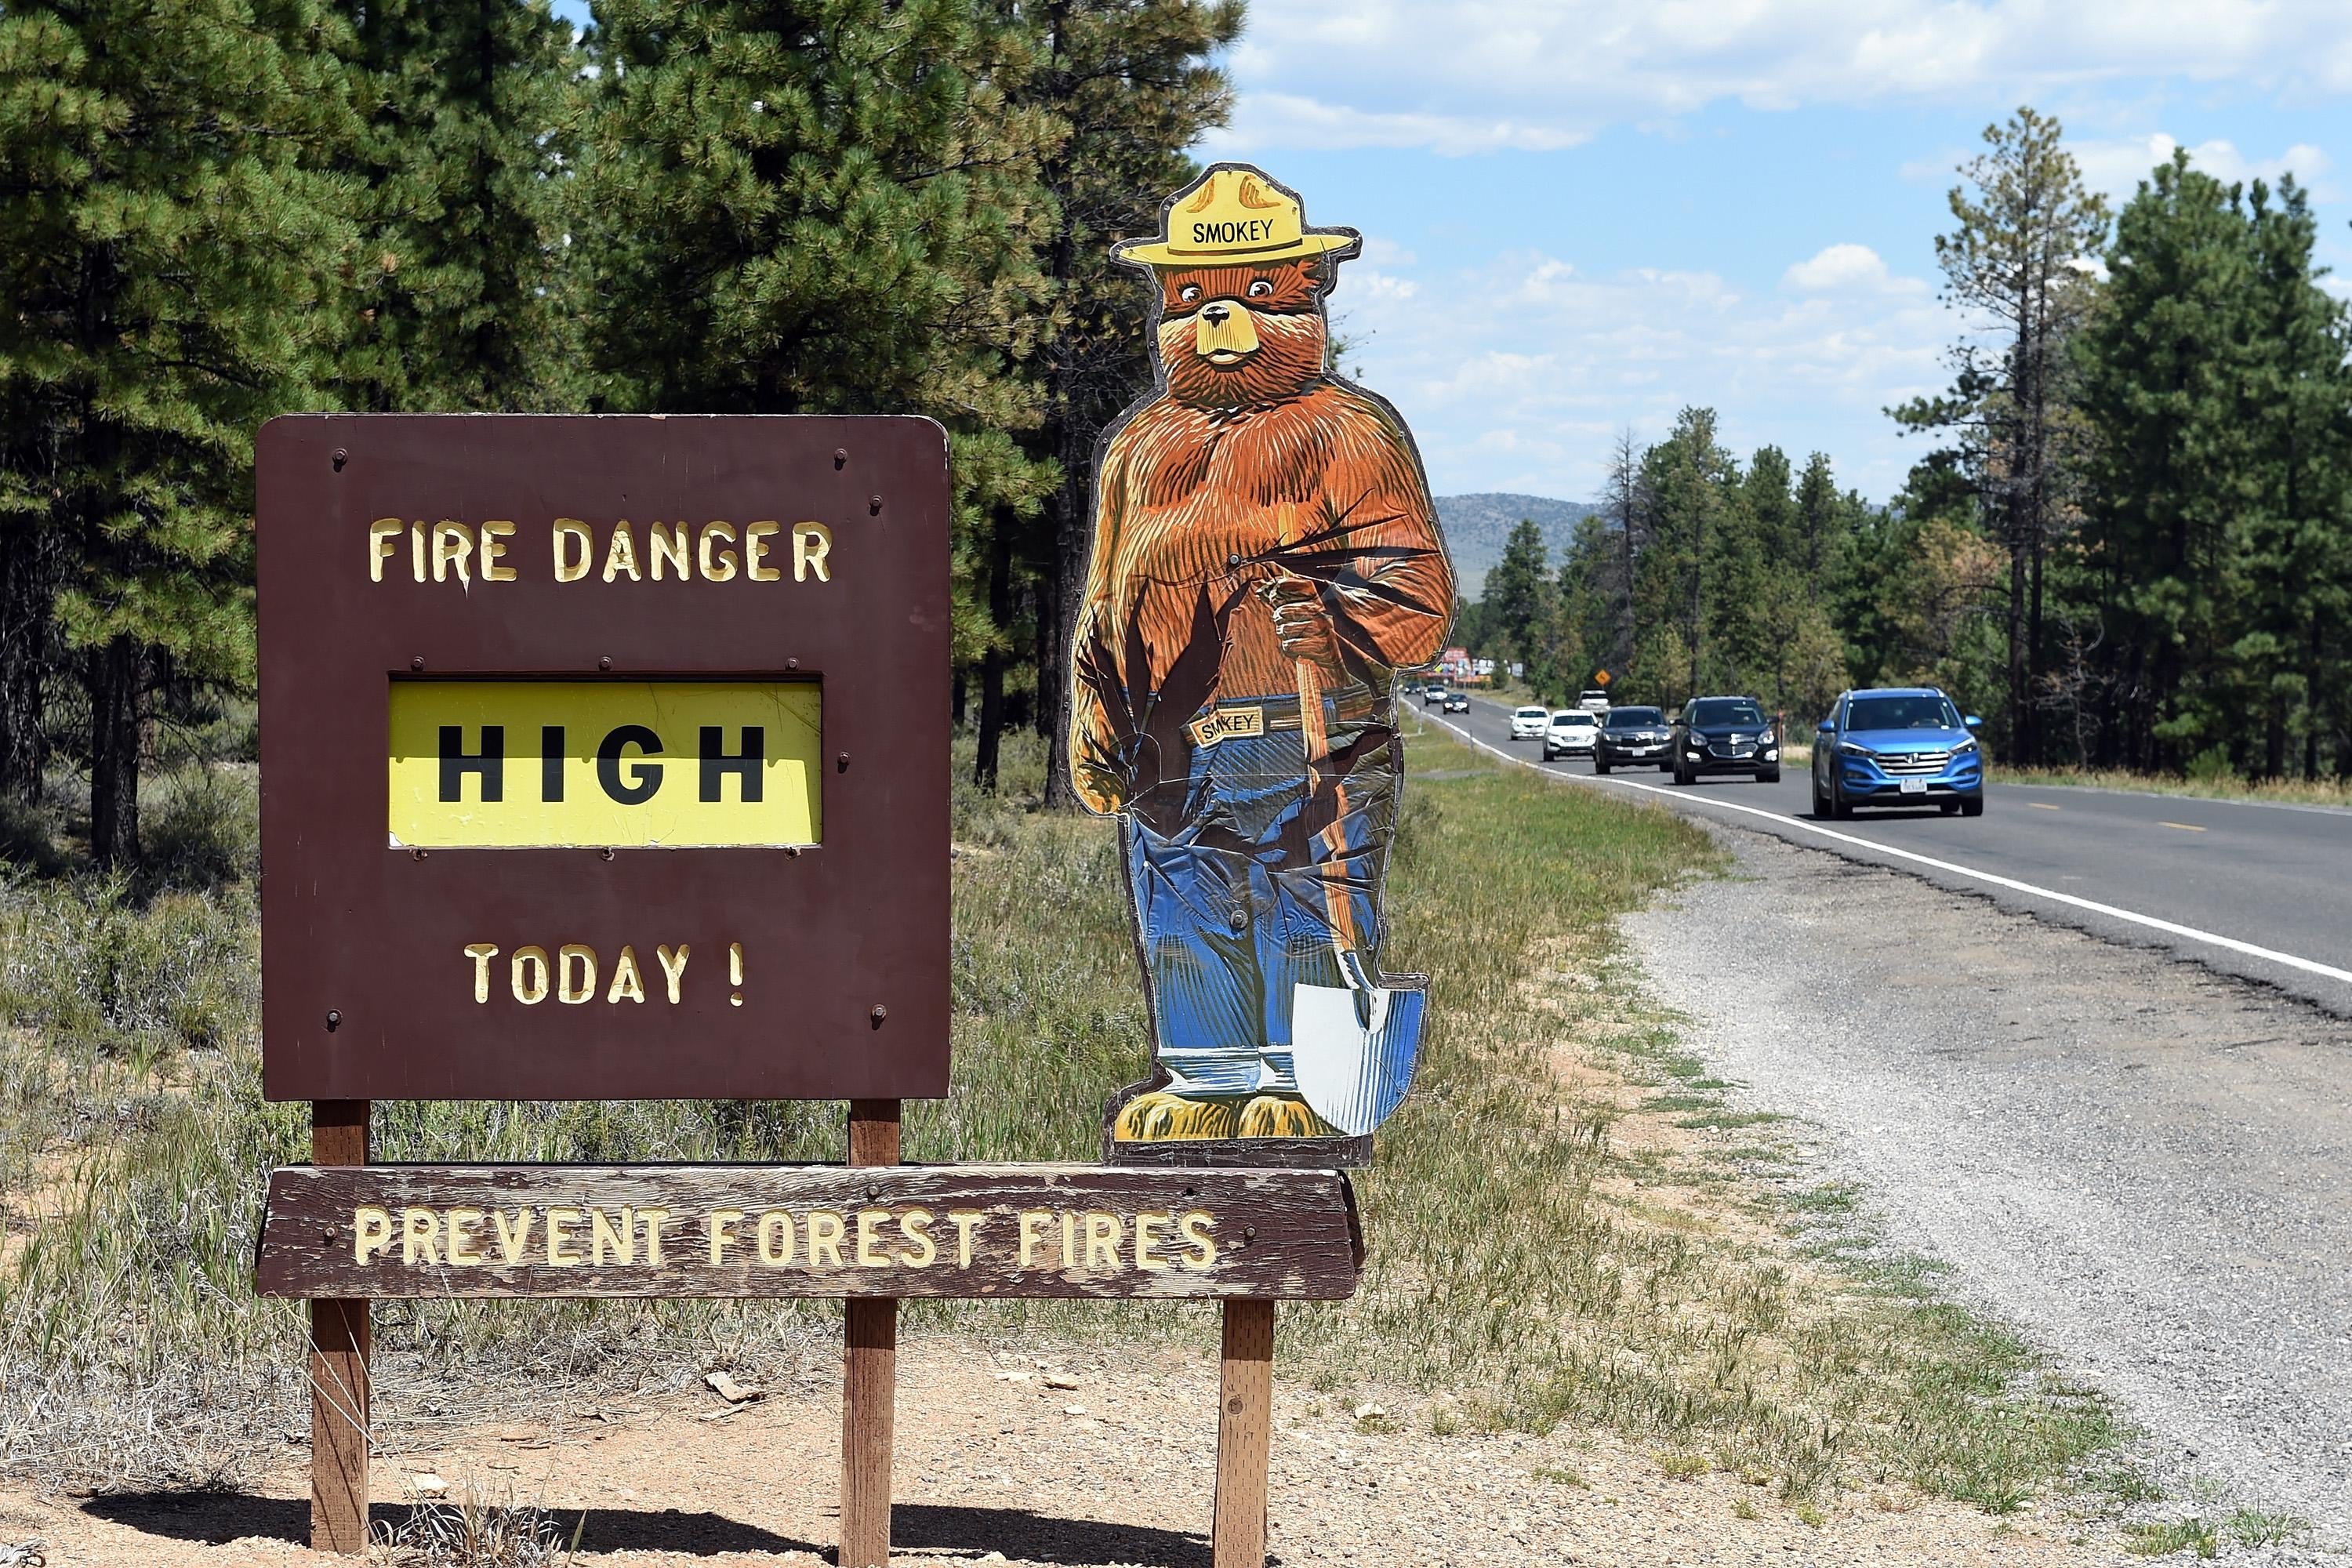 Smokey Bear as part of the Smokey Bear Wildfire Prevention campaign on August 13, 2016 just outside Bryce Canyon National Park, Utah. 